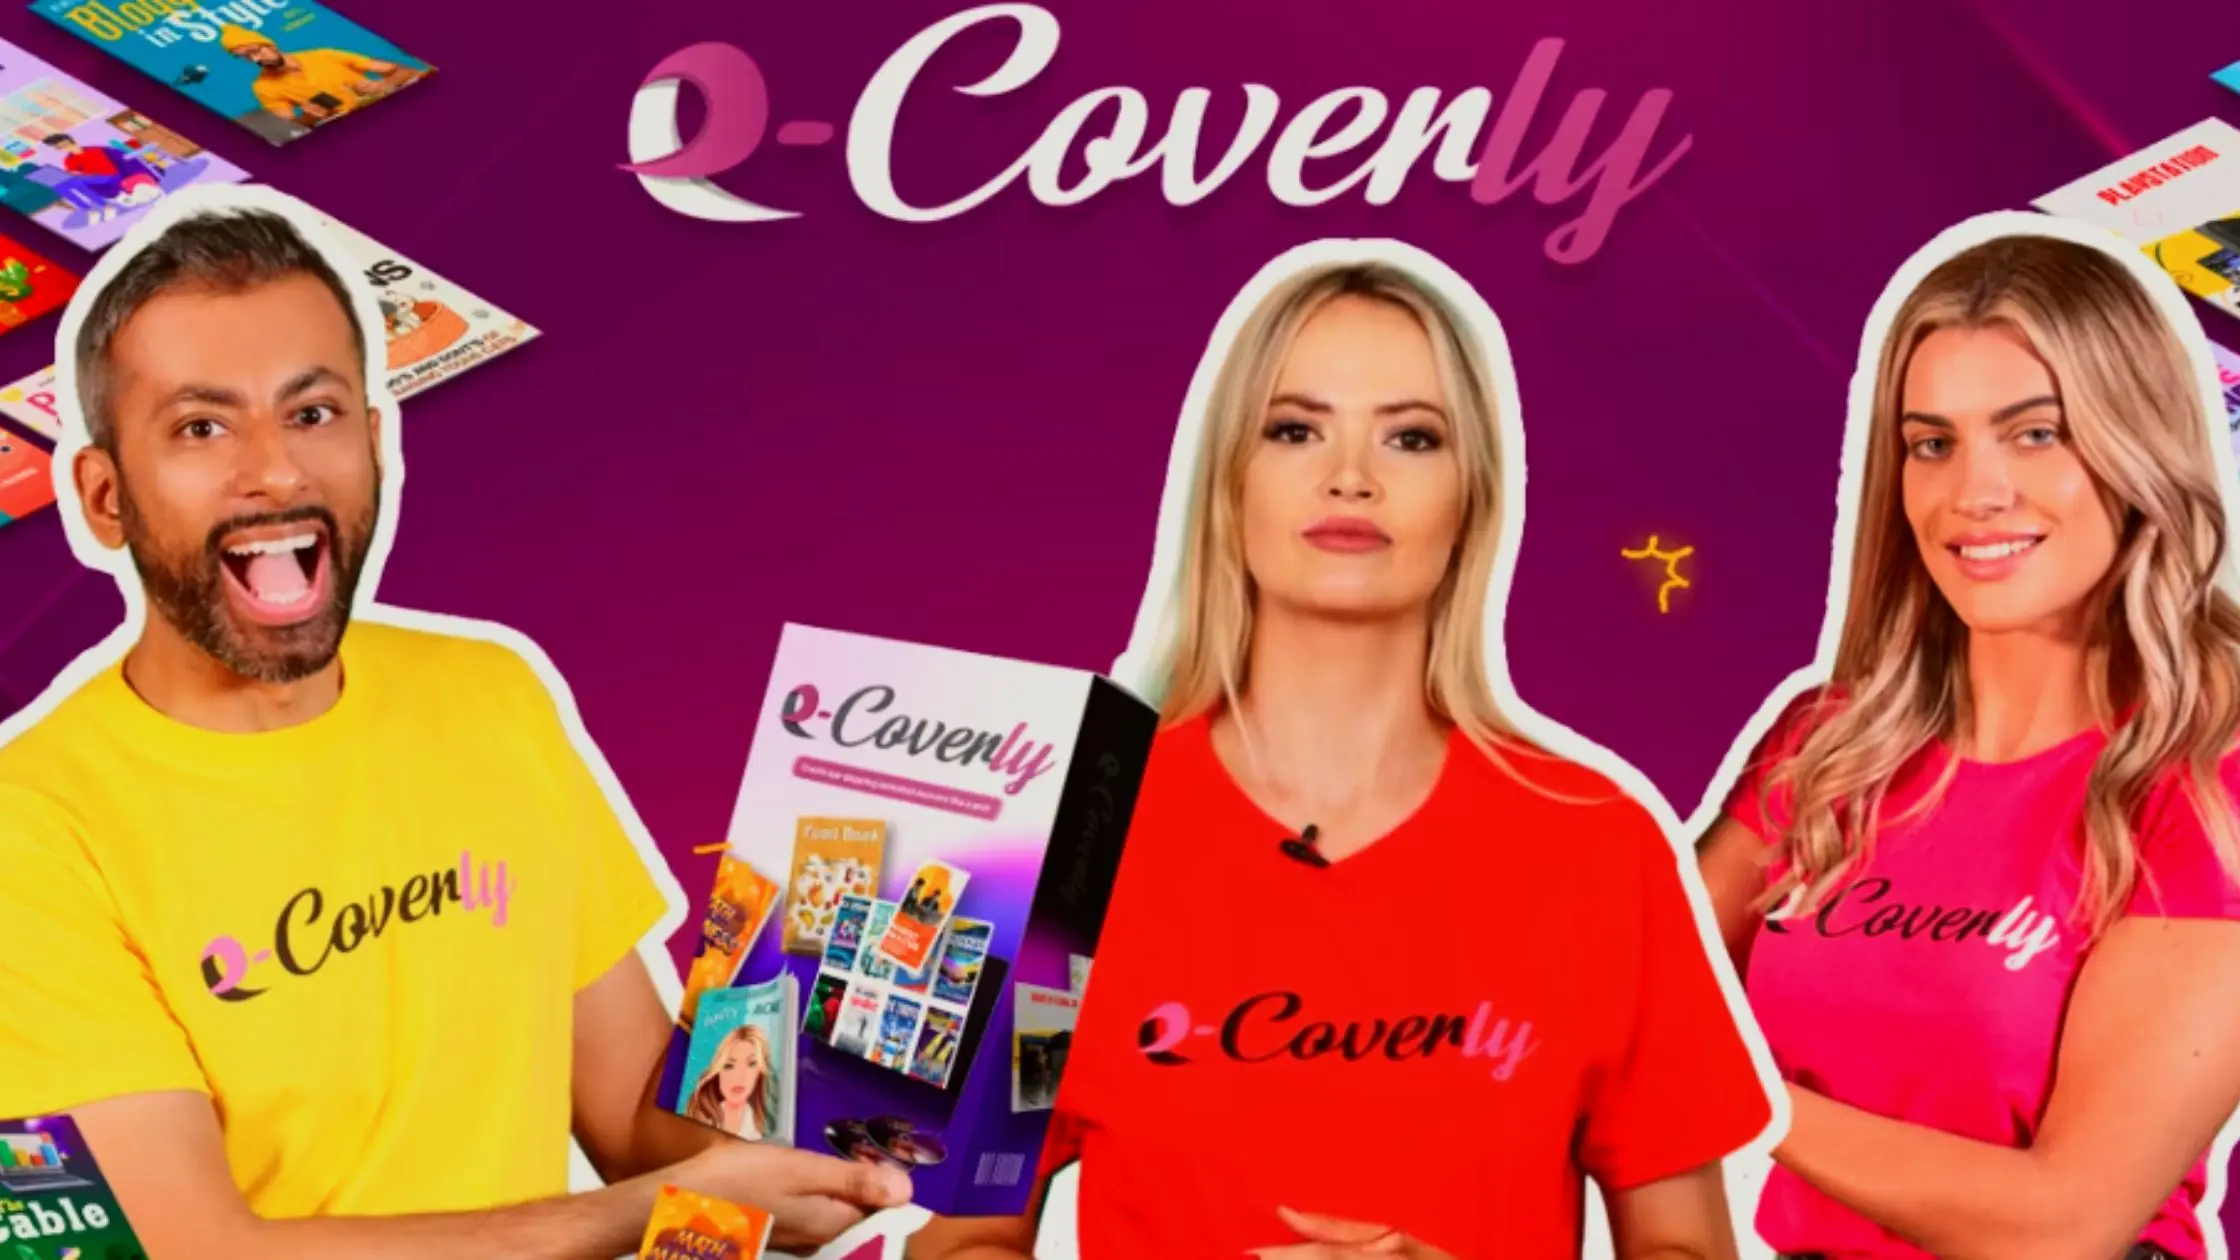 eCoverly Reviews: Can This Software Really Help To Create Attractive Covers?